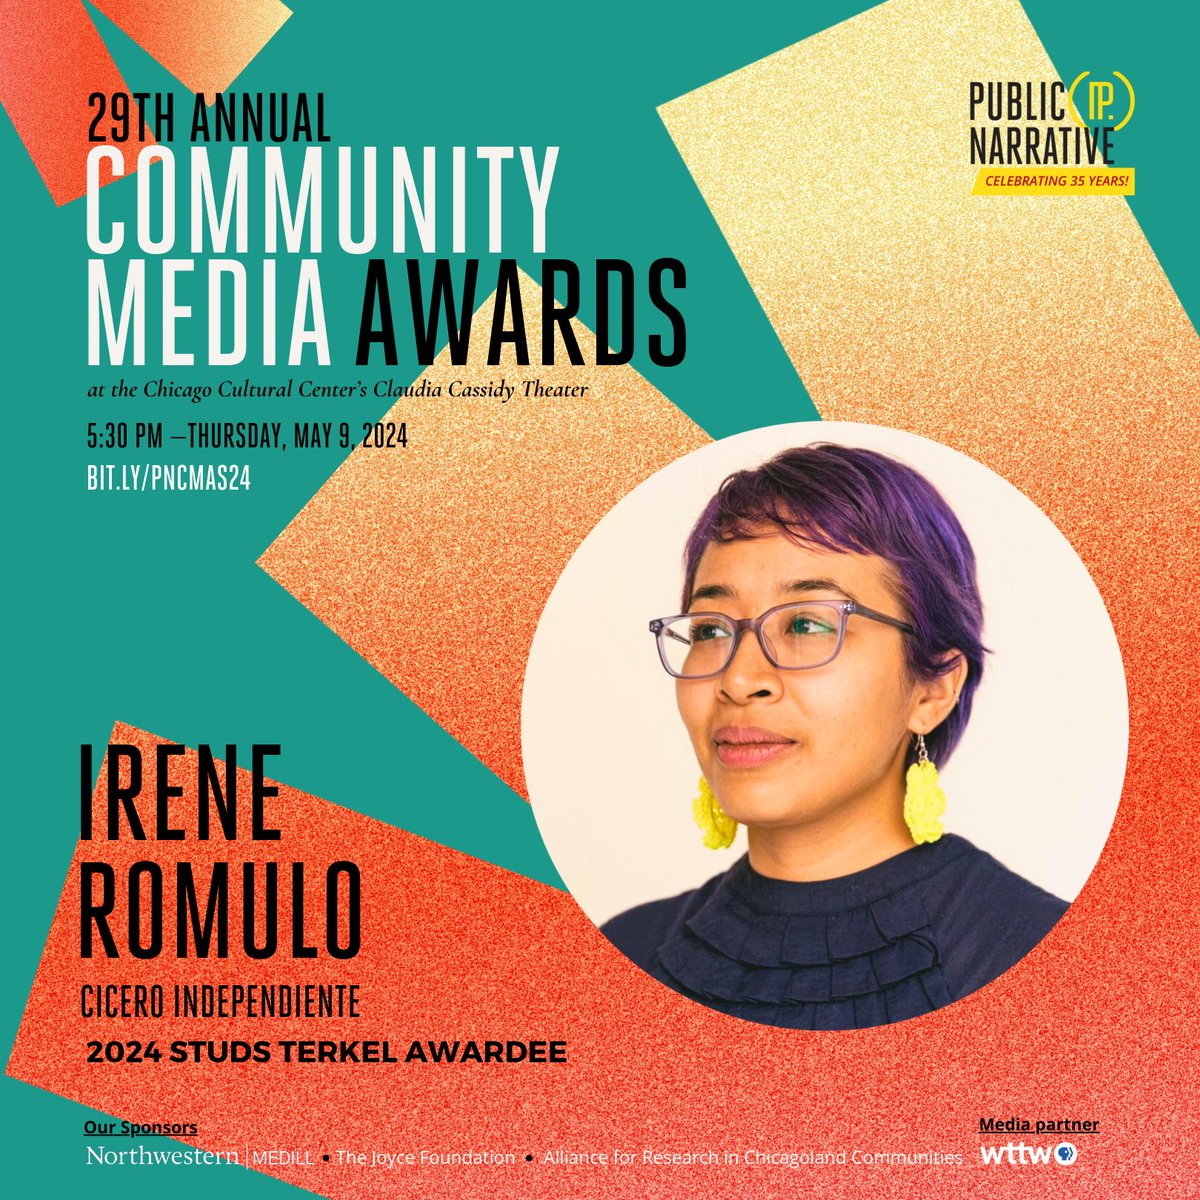 Meet Irene: Irene Romulo (@IreneinCicero) champions news in the #Cicero community. Her journey from organizer to co-founder of @CiceroNoticias fuels change within and outside the newsroom. bit.ly/PNCMAS24